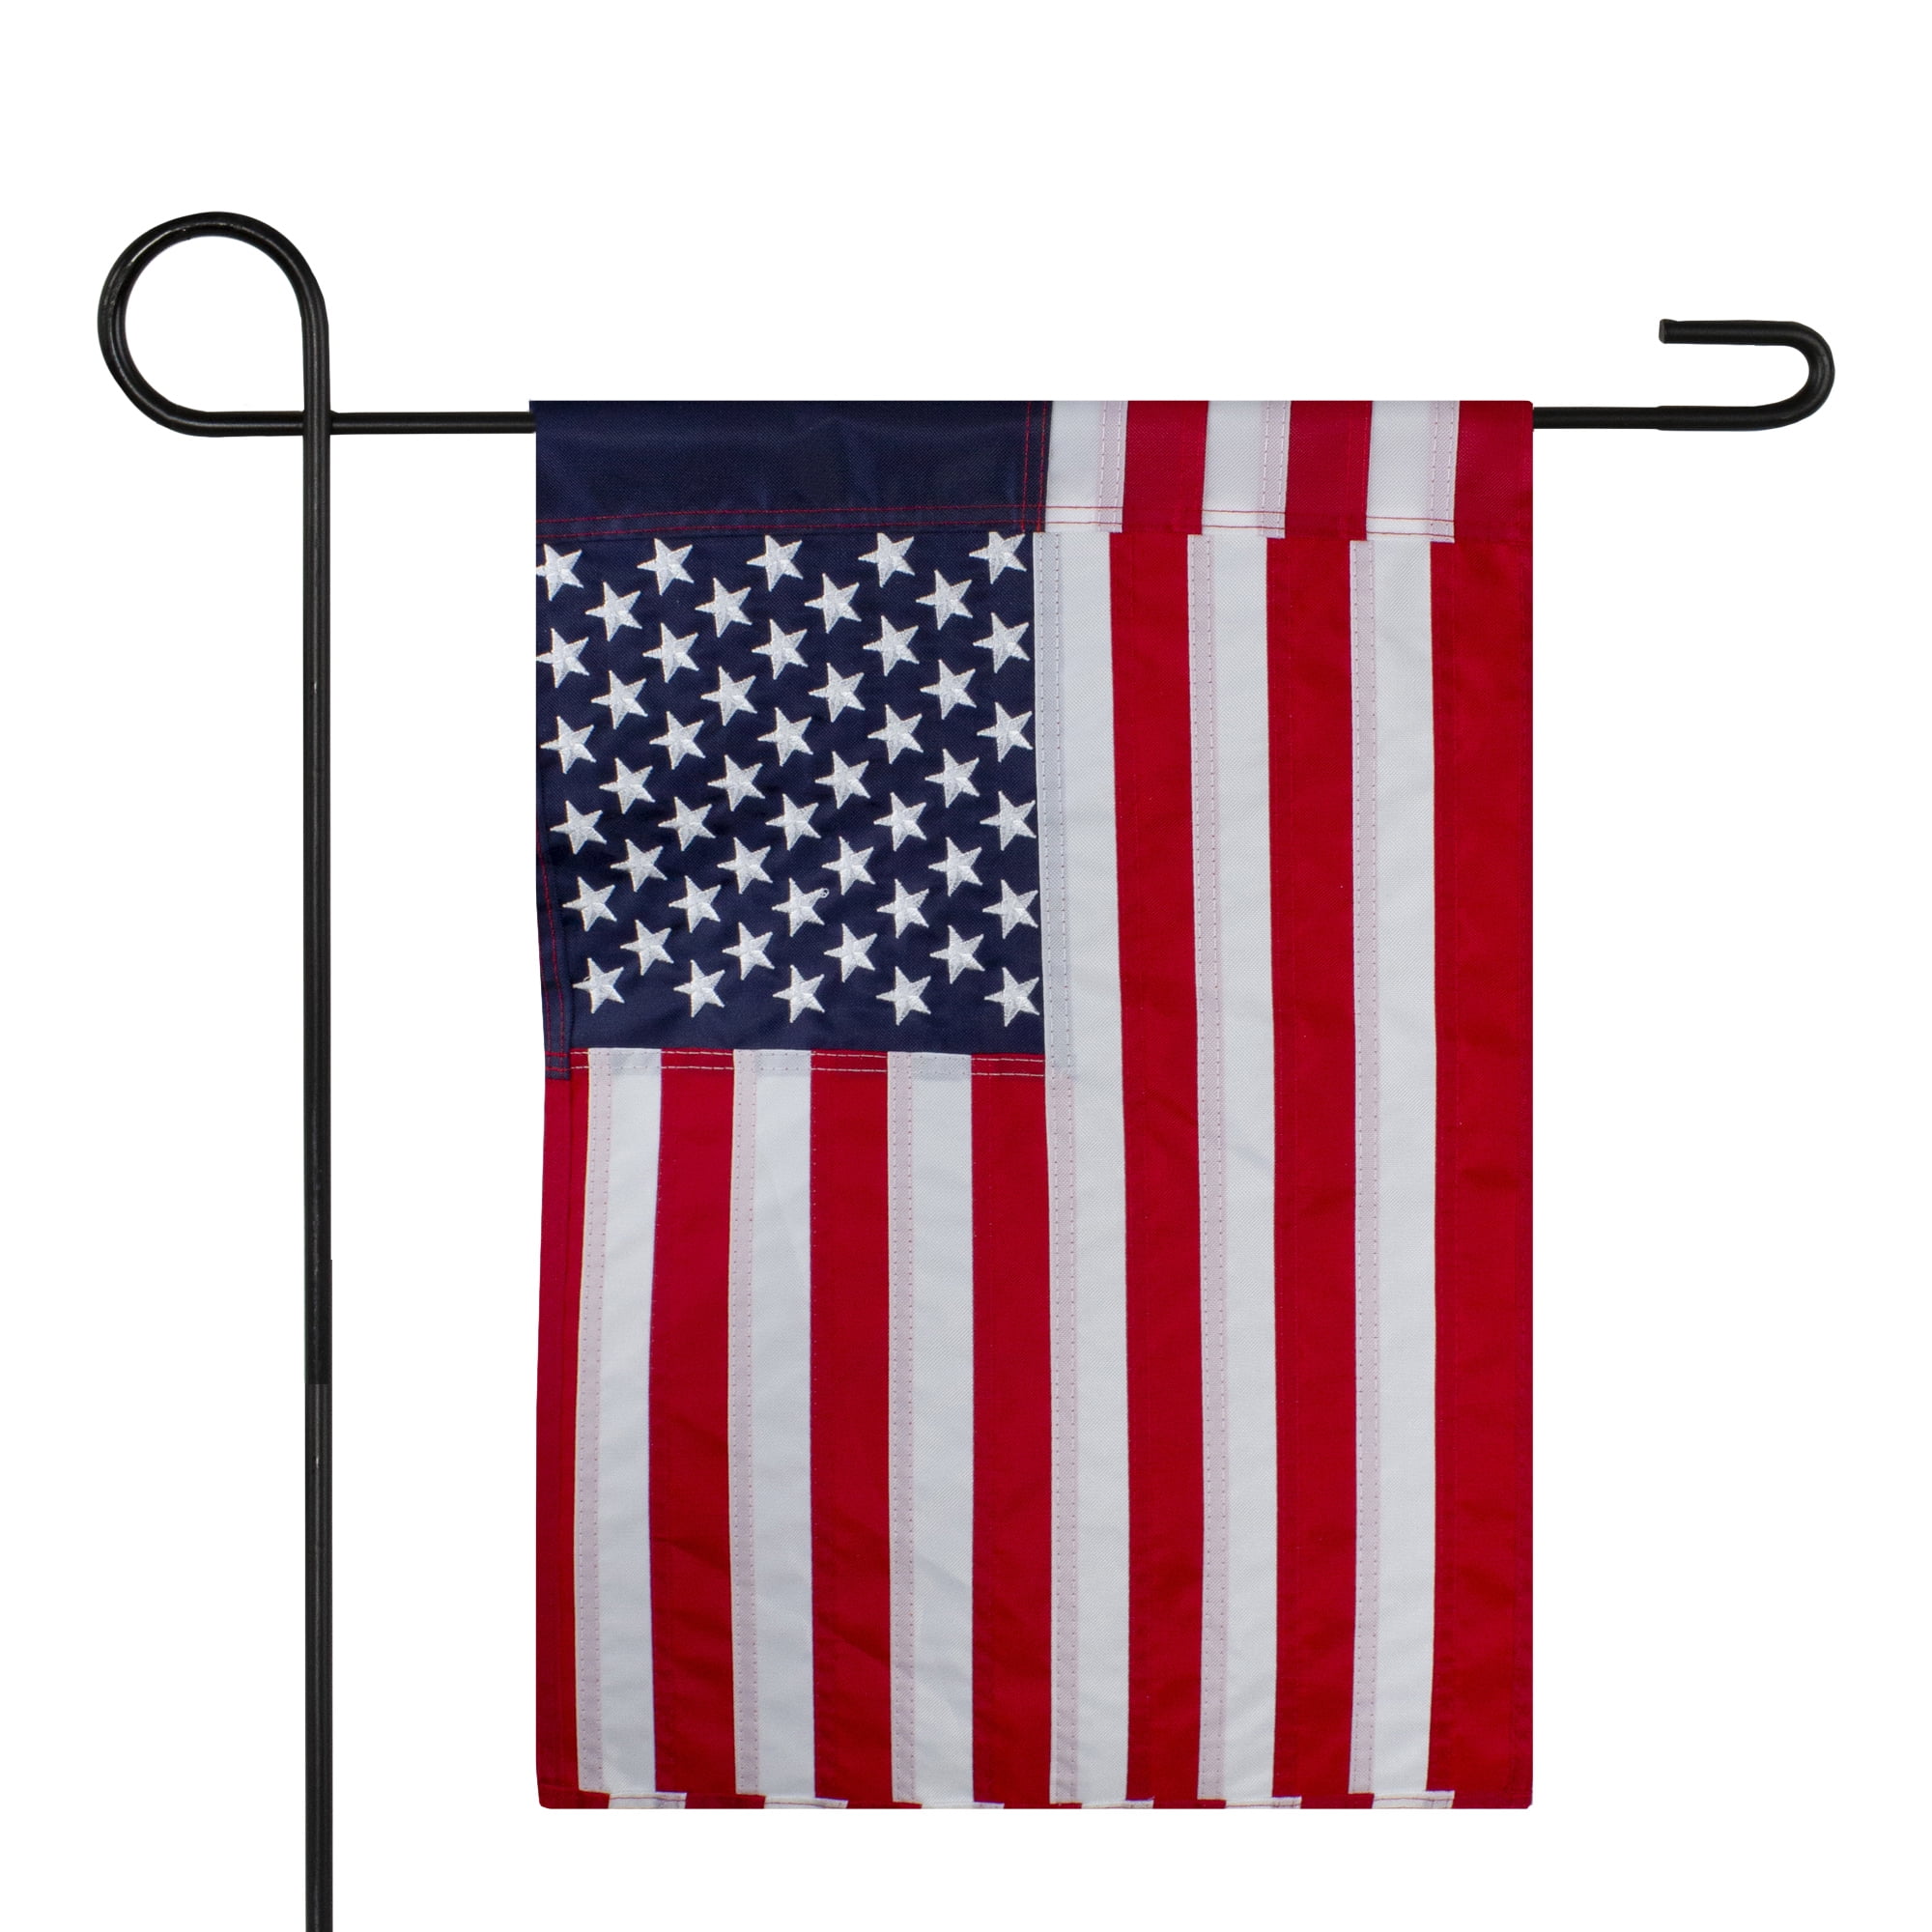 Free Ship! NEW 12.5"x18" USA/4th of July Patriotic CAMPER/PICNIC Garden Flag 